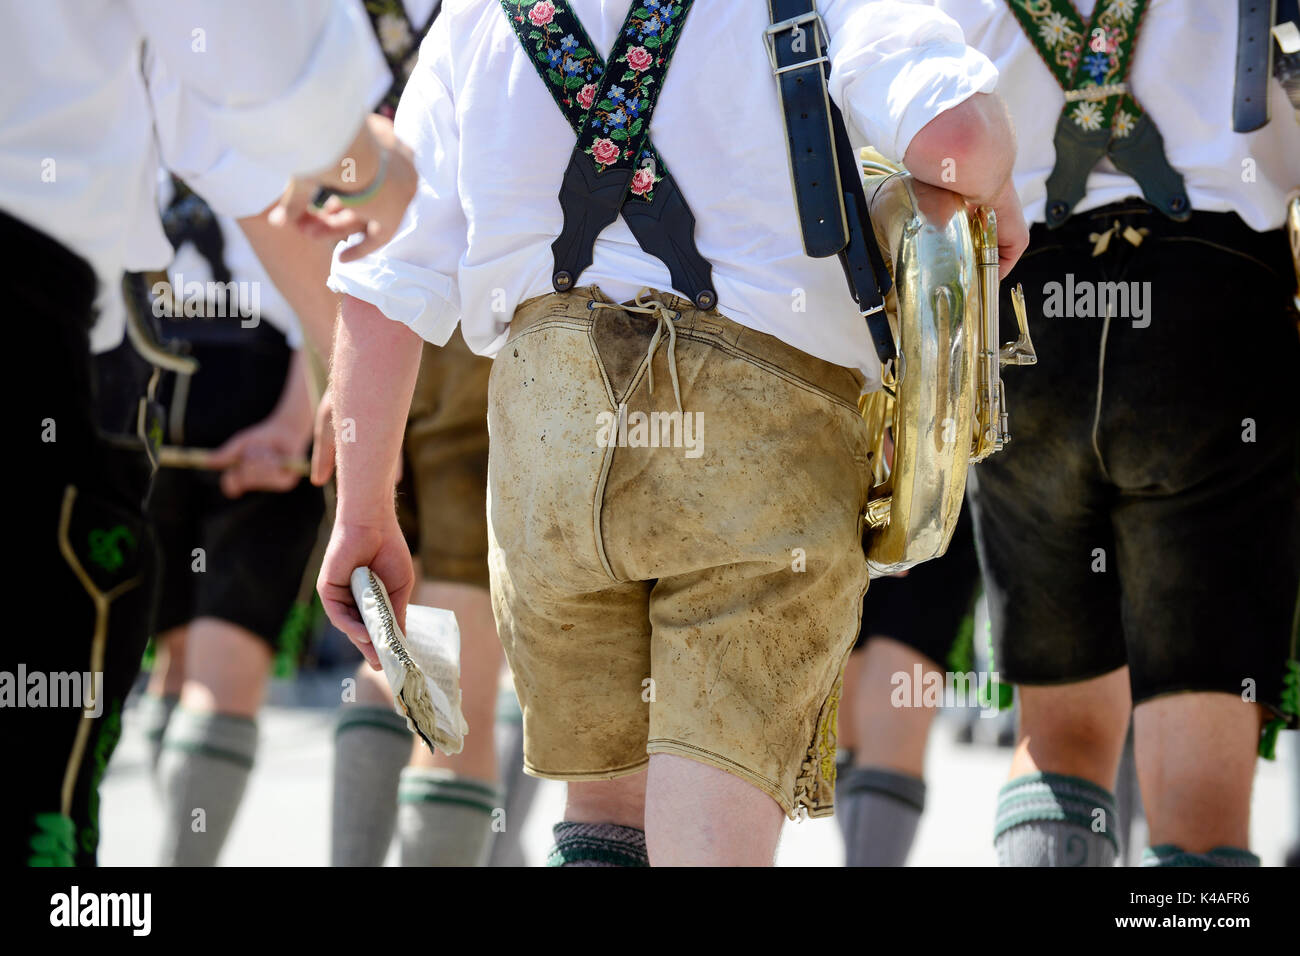 Musicians in leather trousers and Tuba, traditional costume parade, Gaufest Loisachgau, Egling, Upper Bavaria, Bavaria, Germany Stock Photo